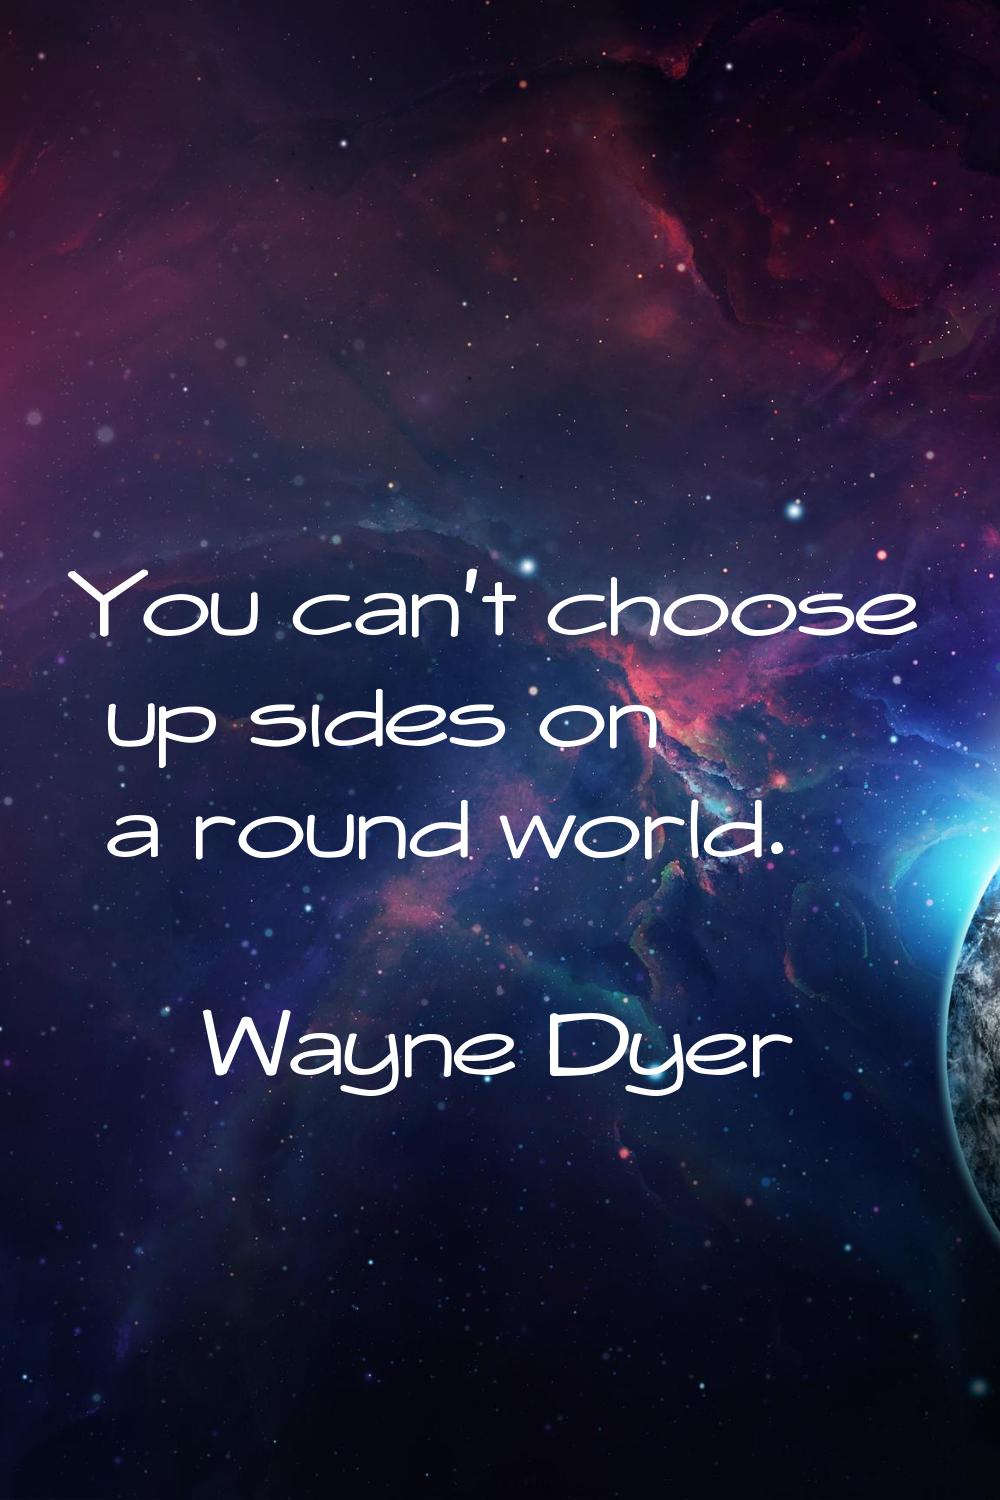 You can't choose up sides on a round world.